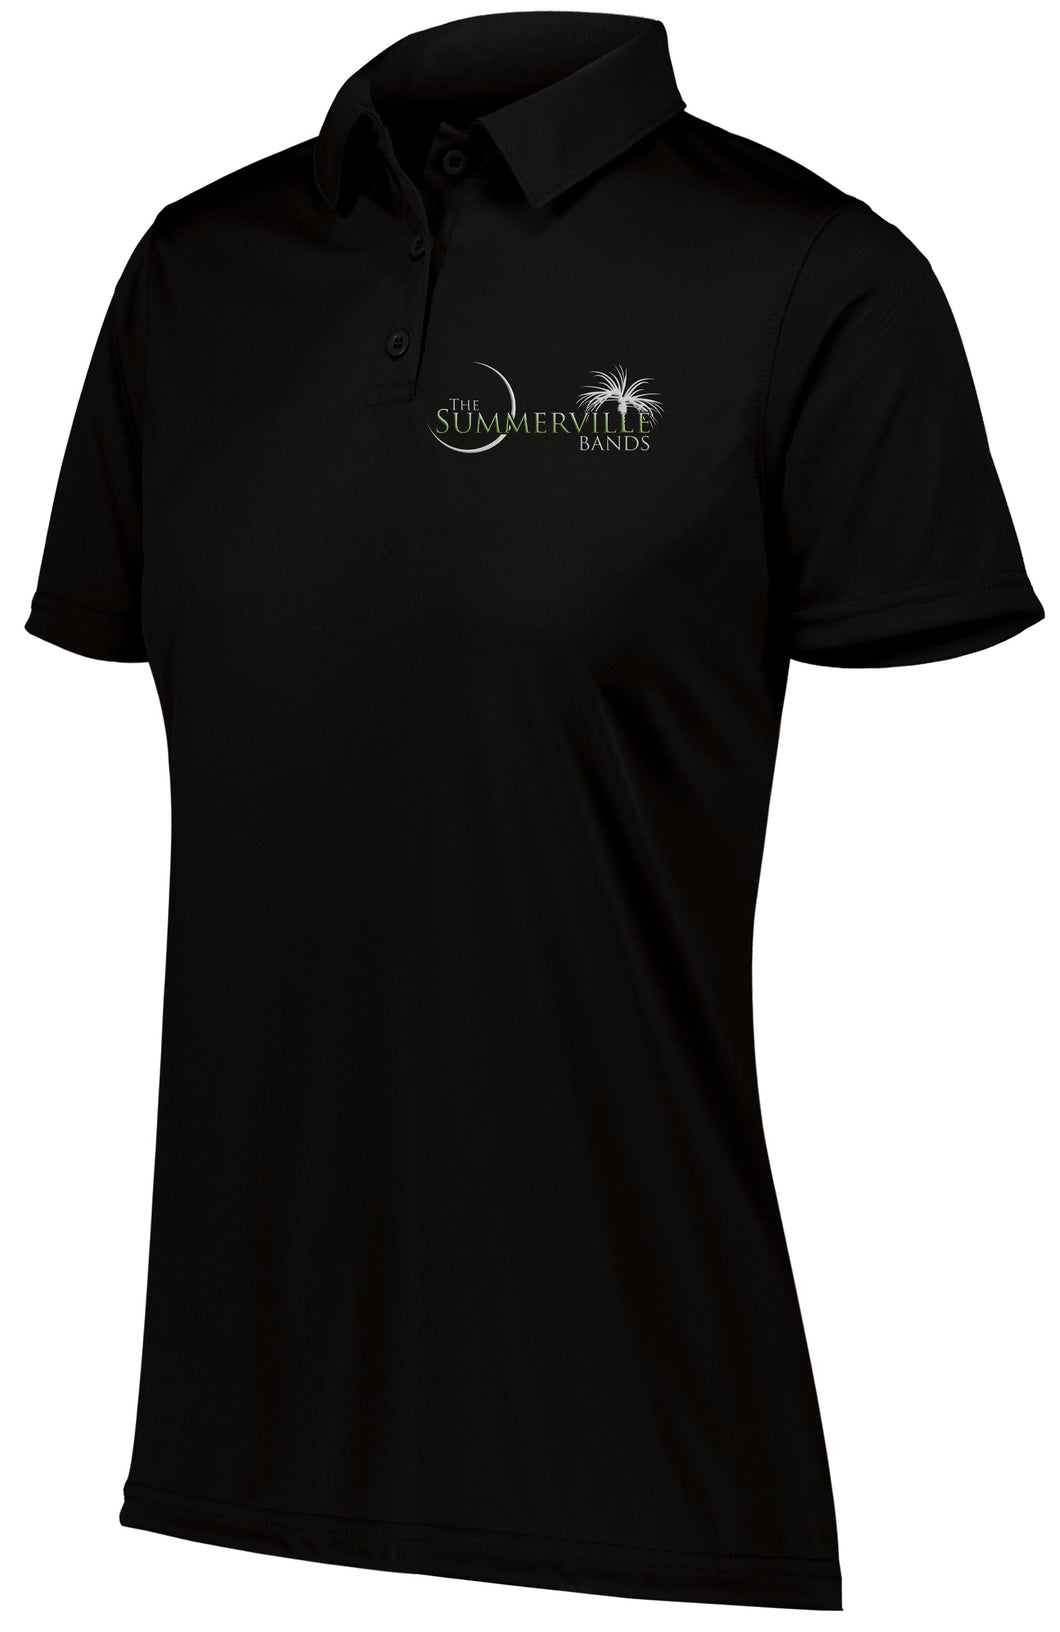 Summerville Bands Embroidered Ladies Vital Embroidered Polo